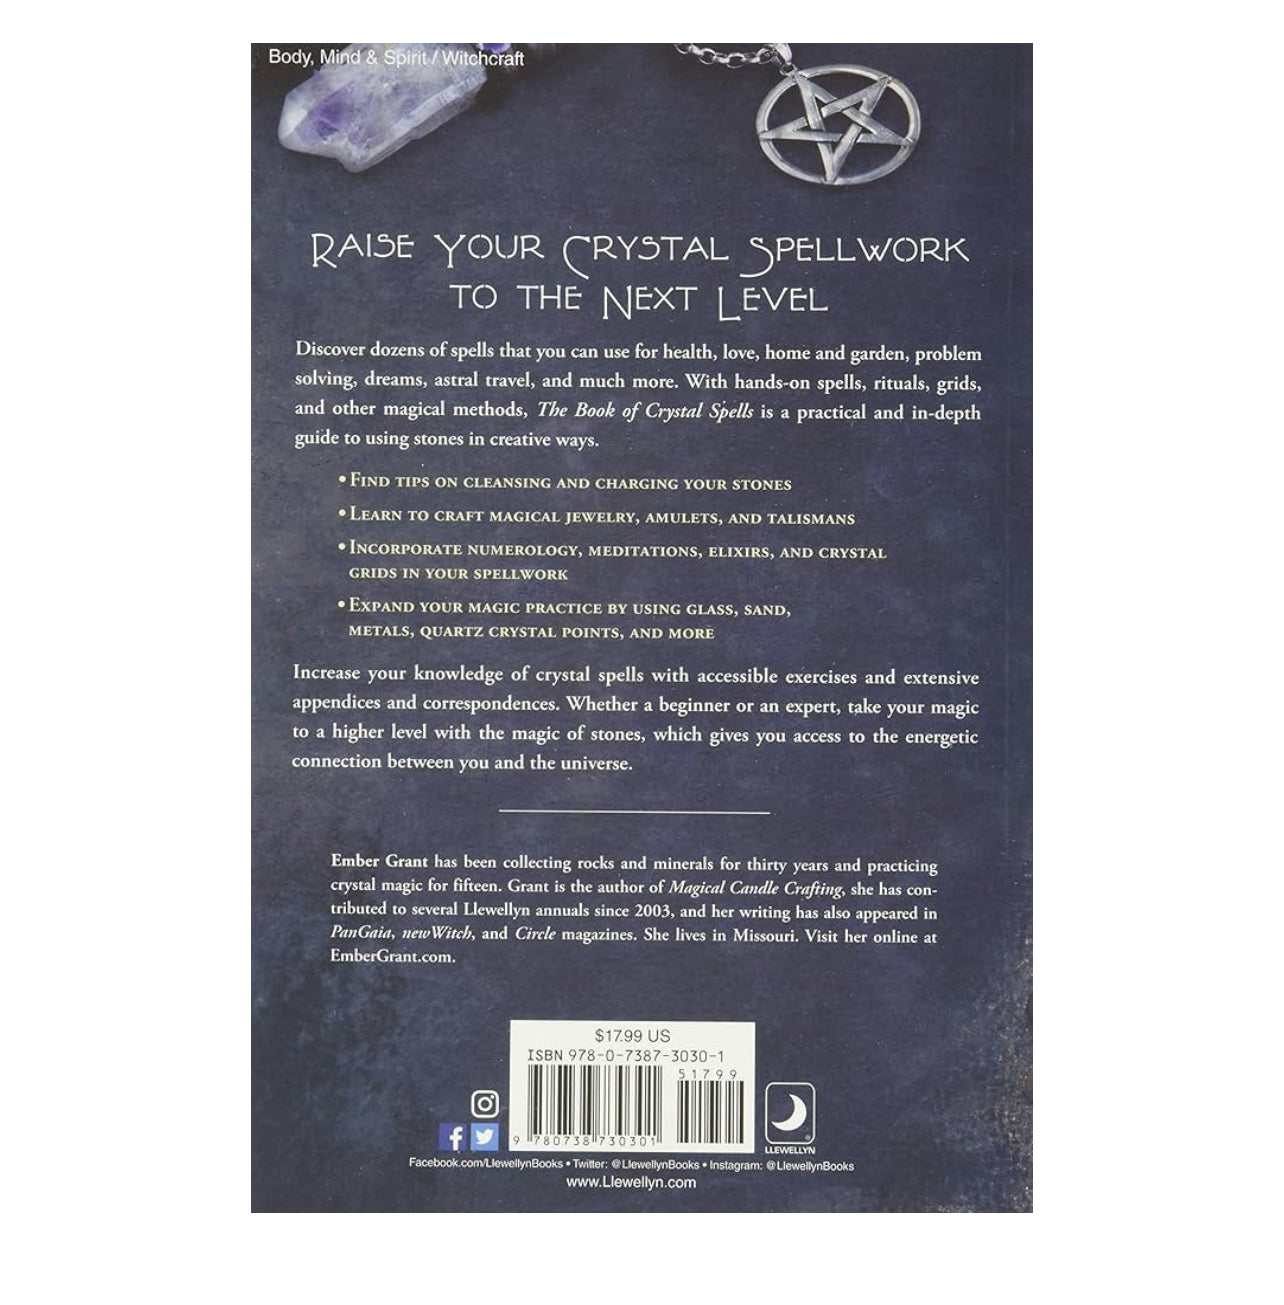 The Book of Crystal Spells: Magical Uses for Stones, Crystals, Minerals and Even Sand